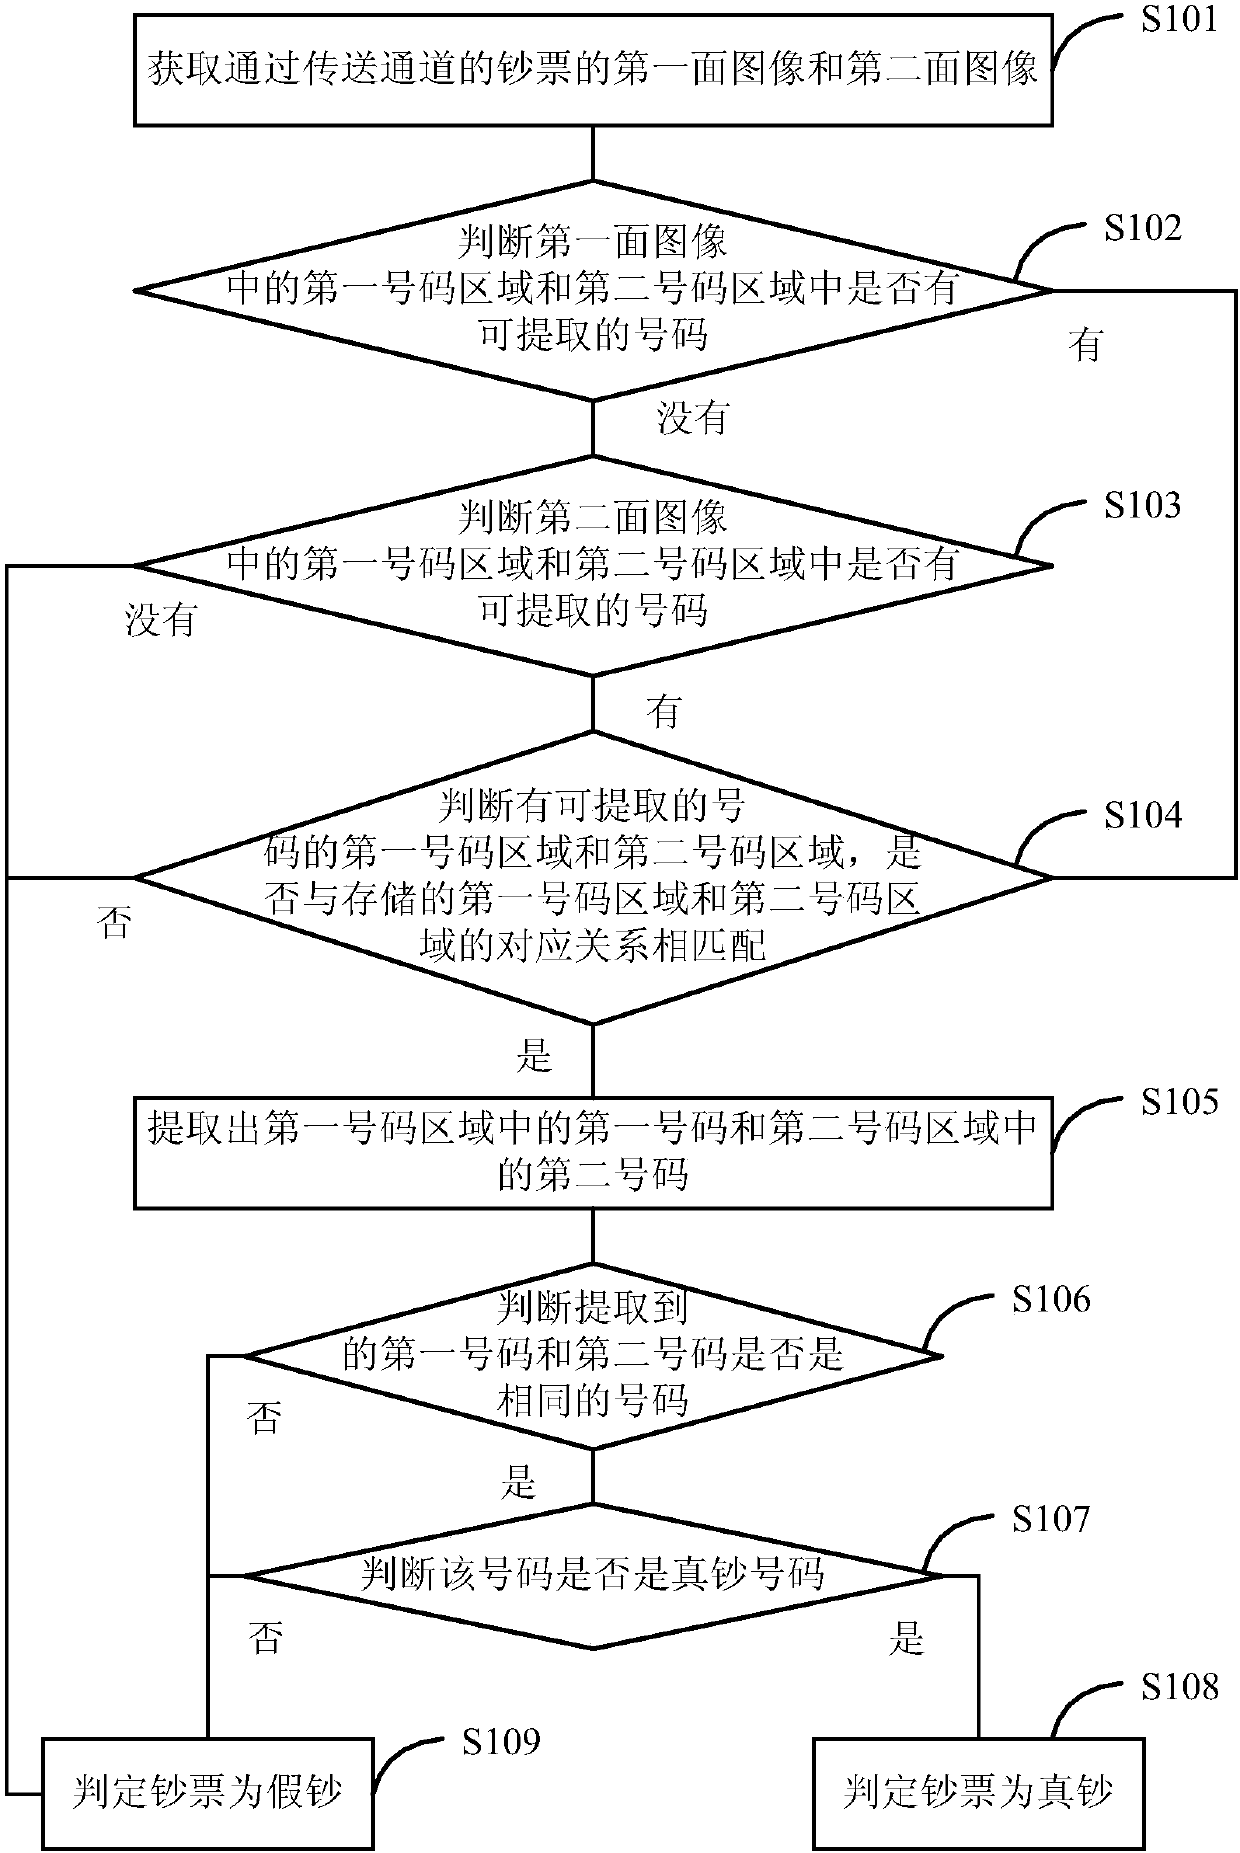 Method and device for extracting number for identification of bank note authenticity